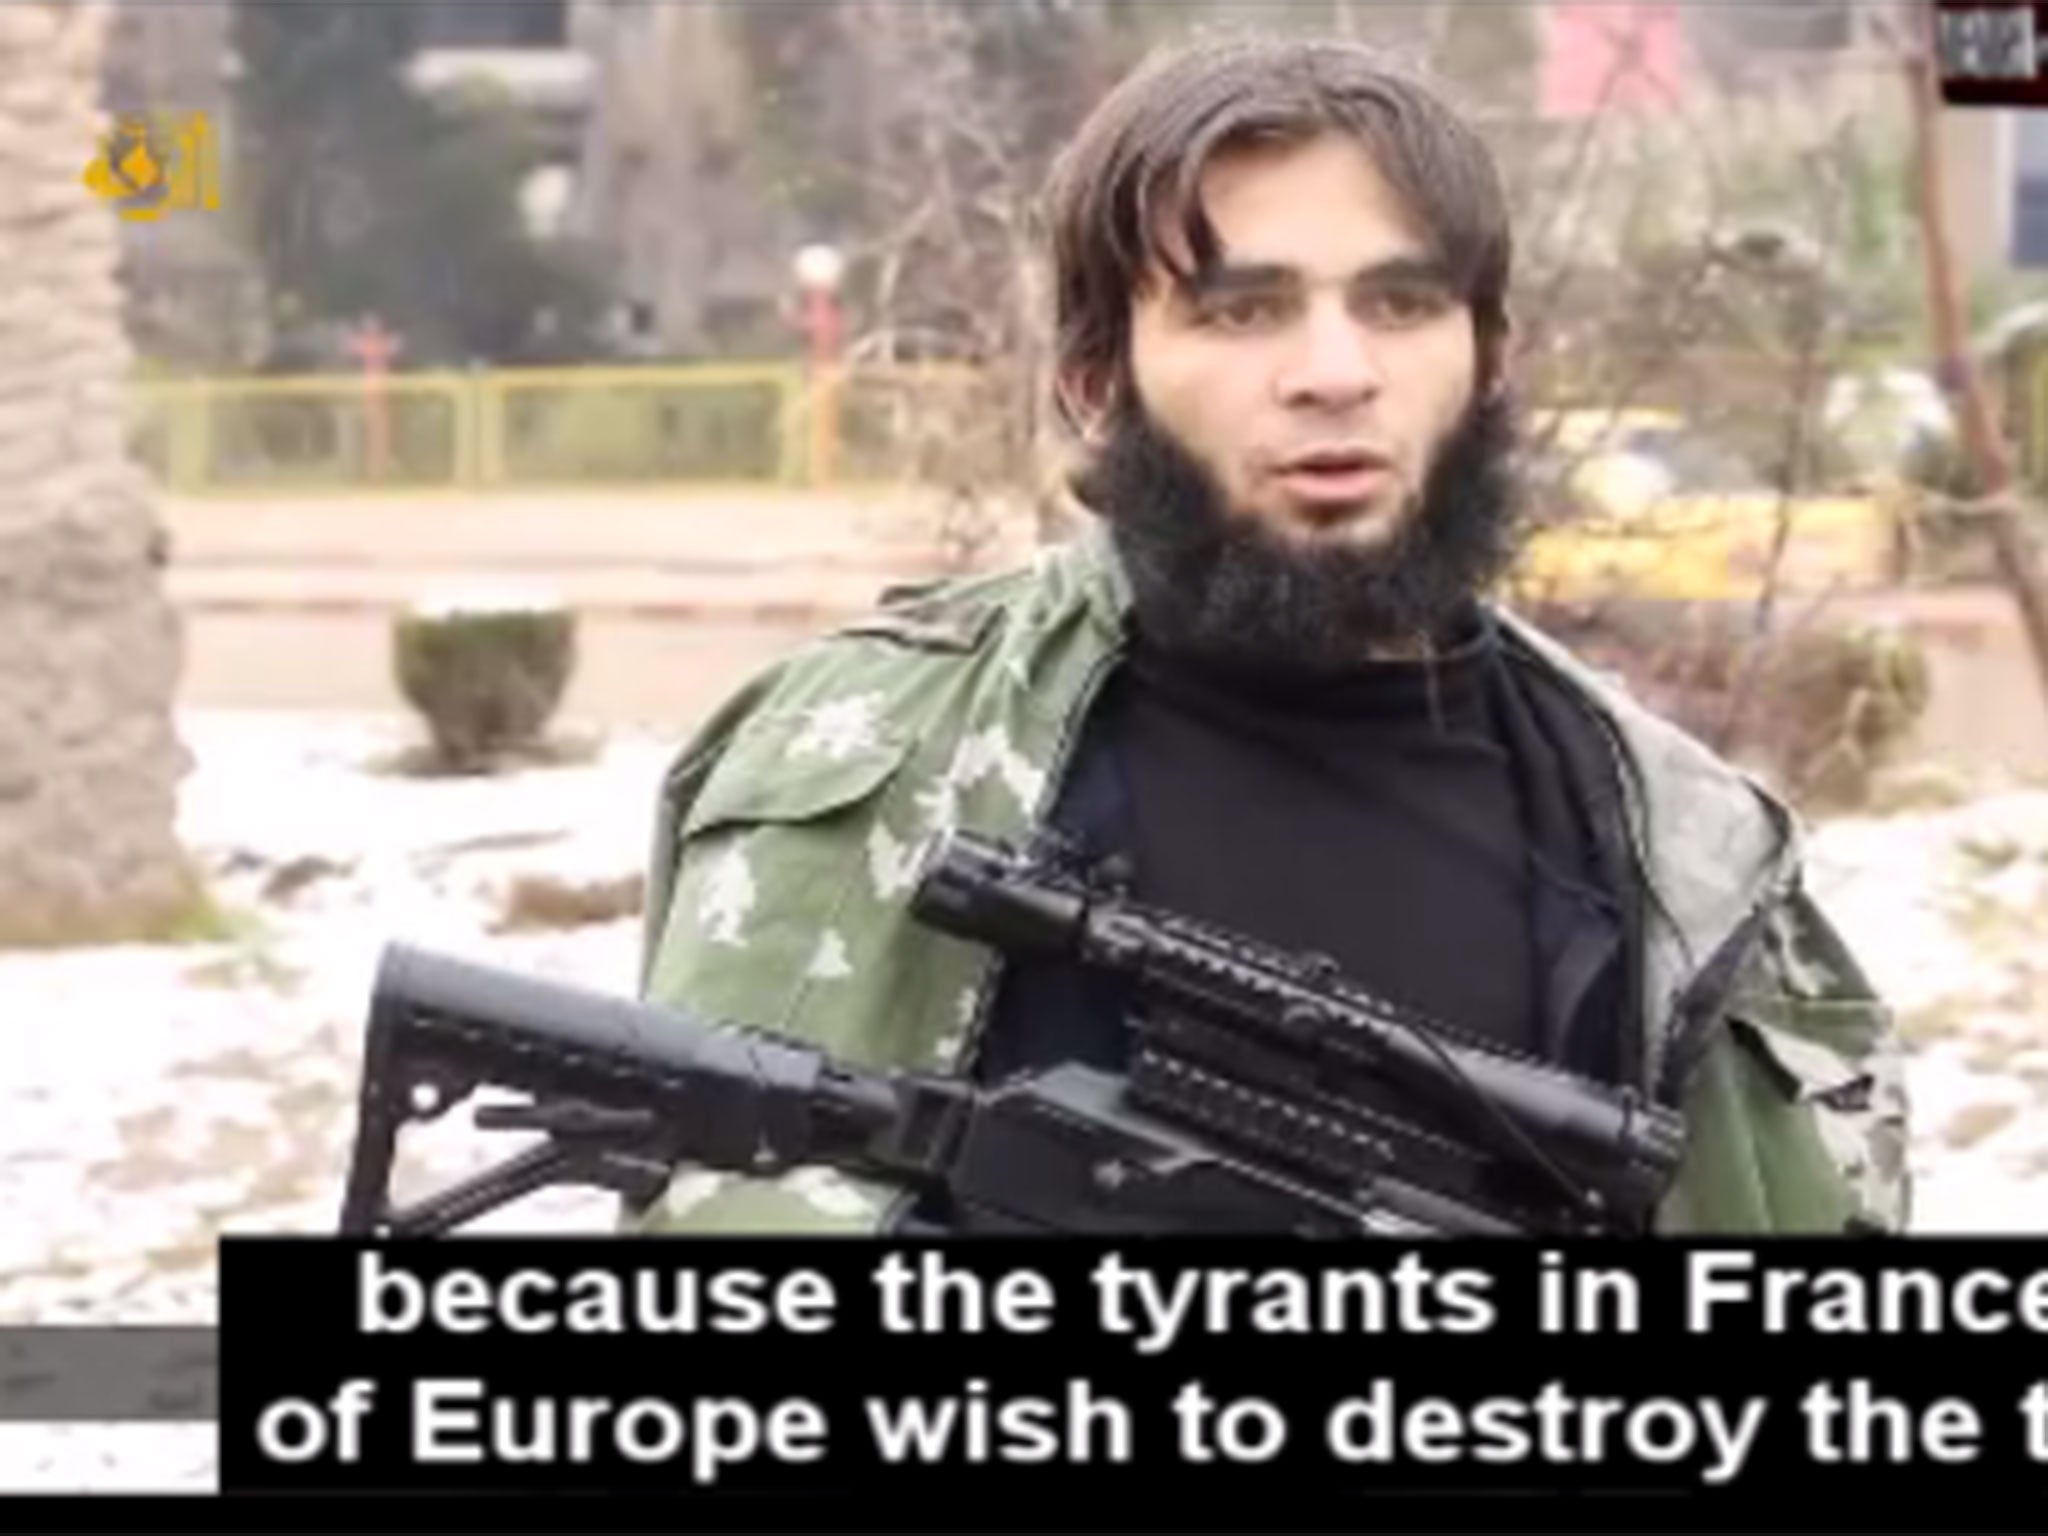 A new Isis video praises the Paris shootings and warns of more attacks to come across Europe